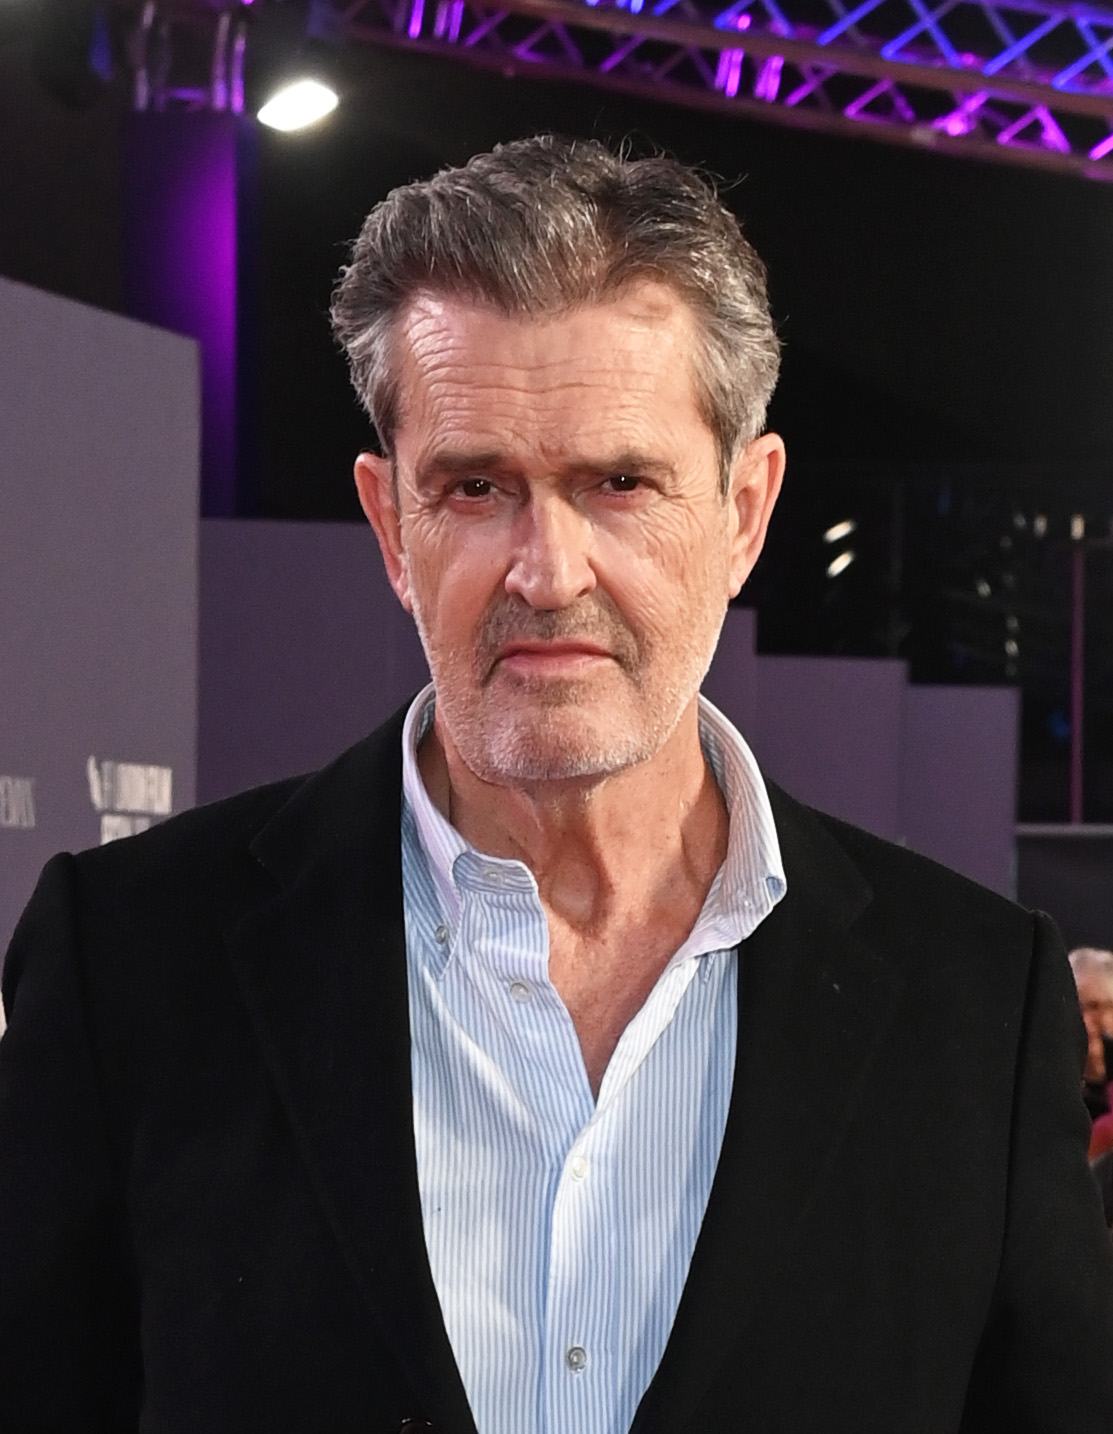 Rupert Everett at The Royal Festival Hall on October 15, 2022, in London, England. | Source: Getty Images